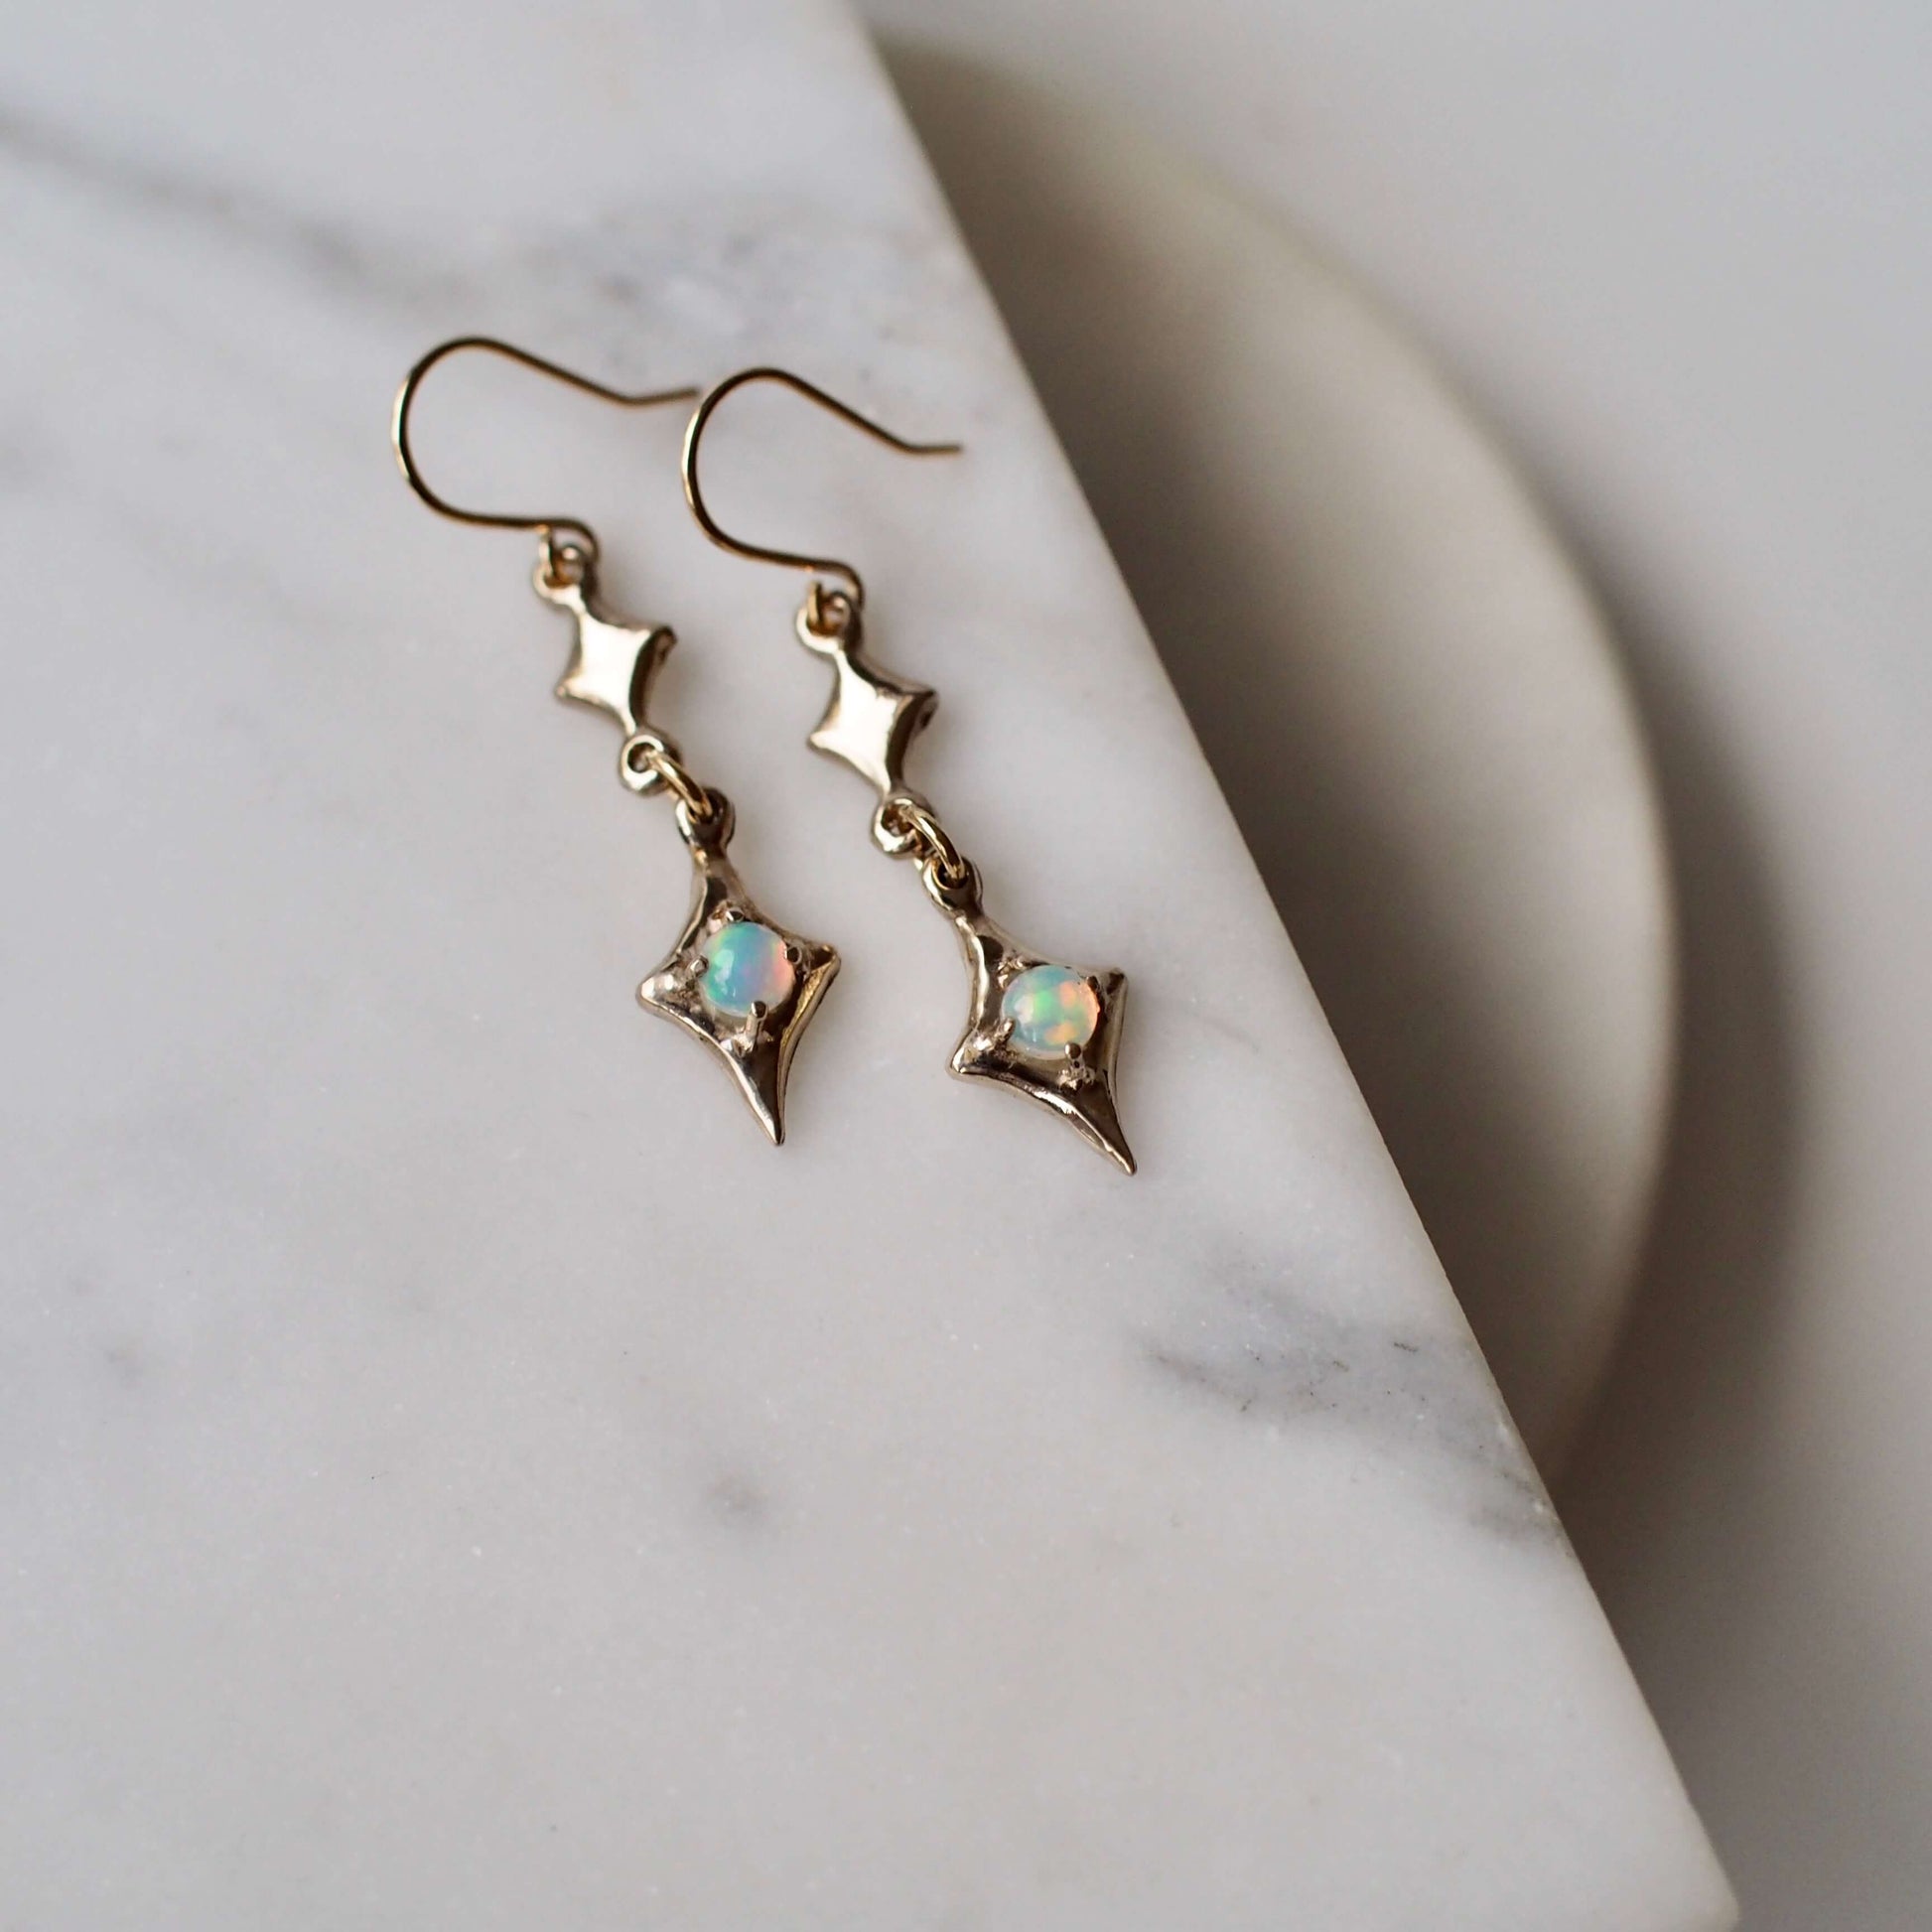 Sparkly four point star earrings featuring natural opal